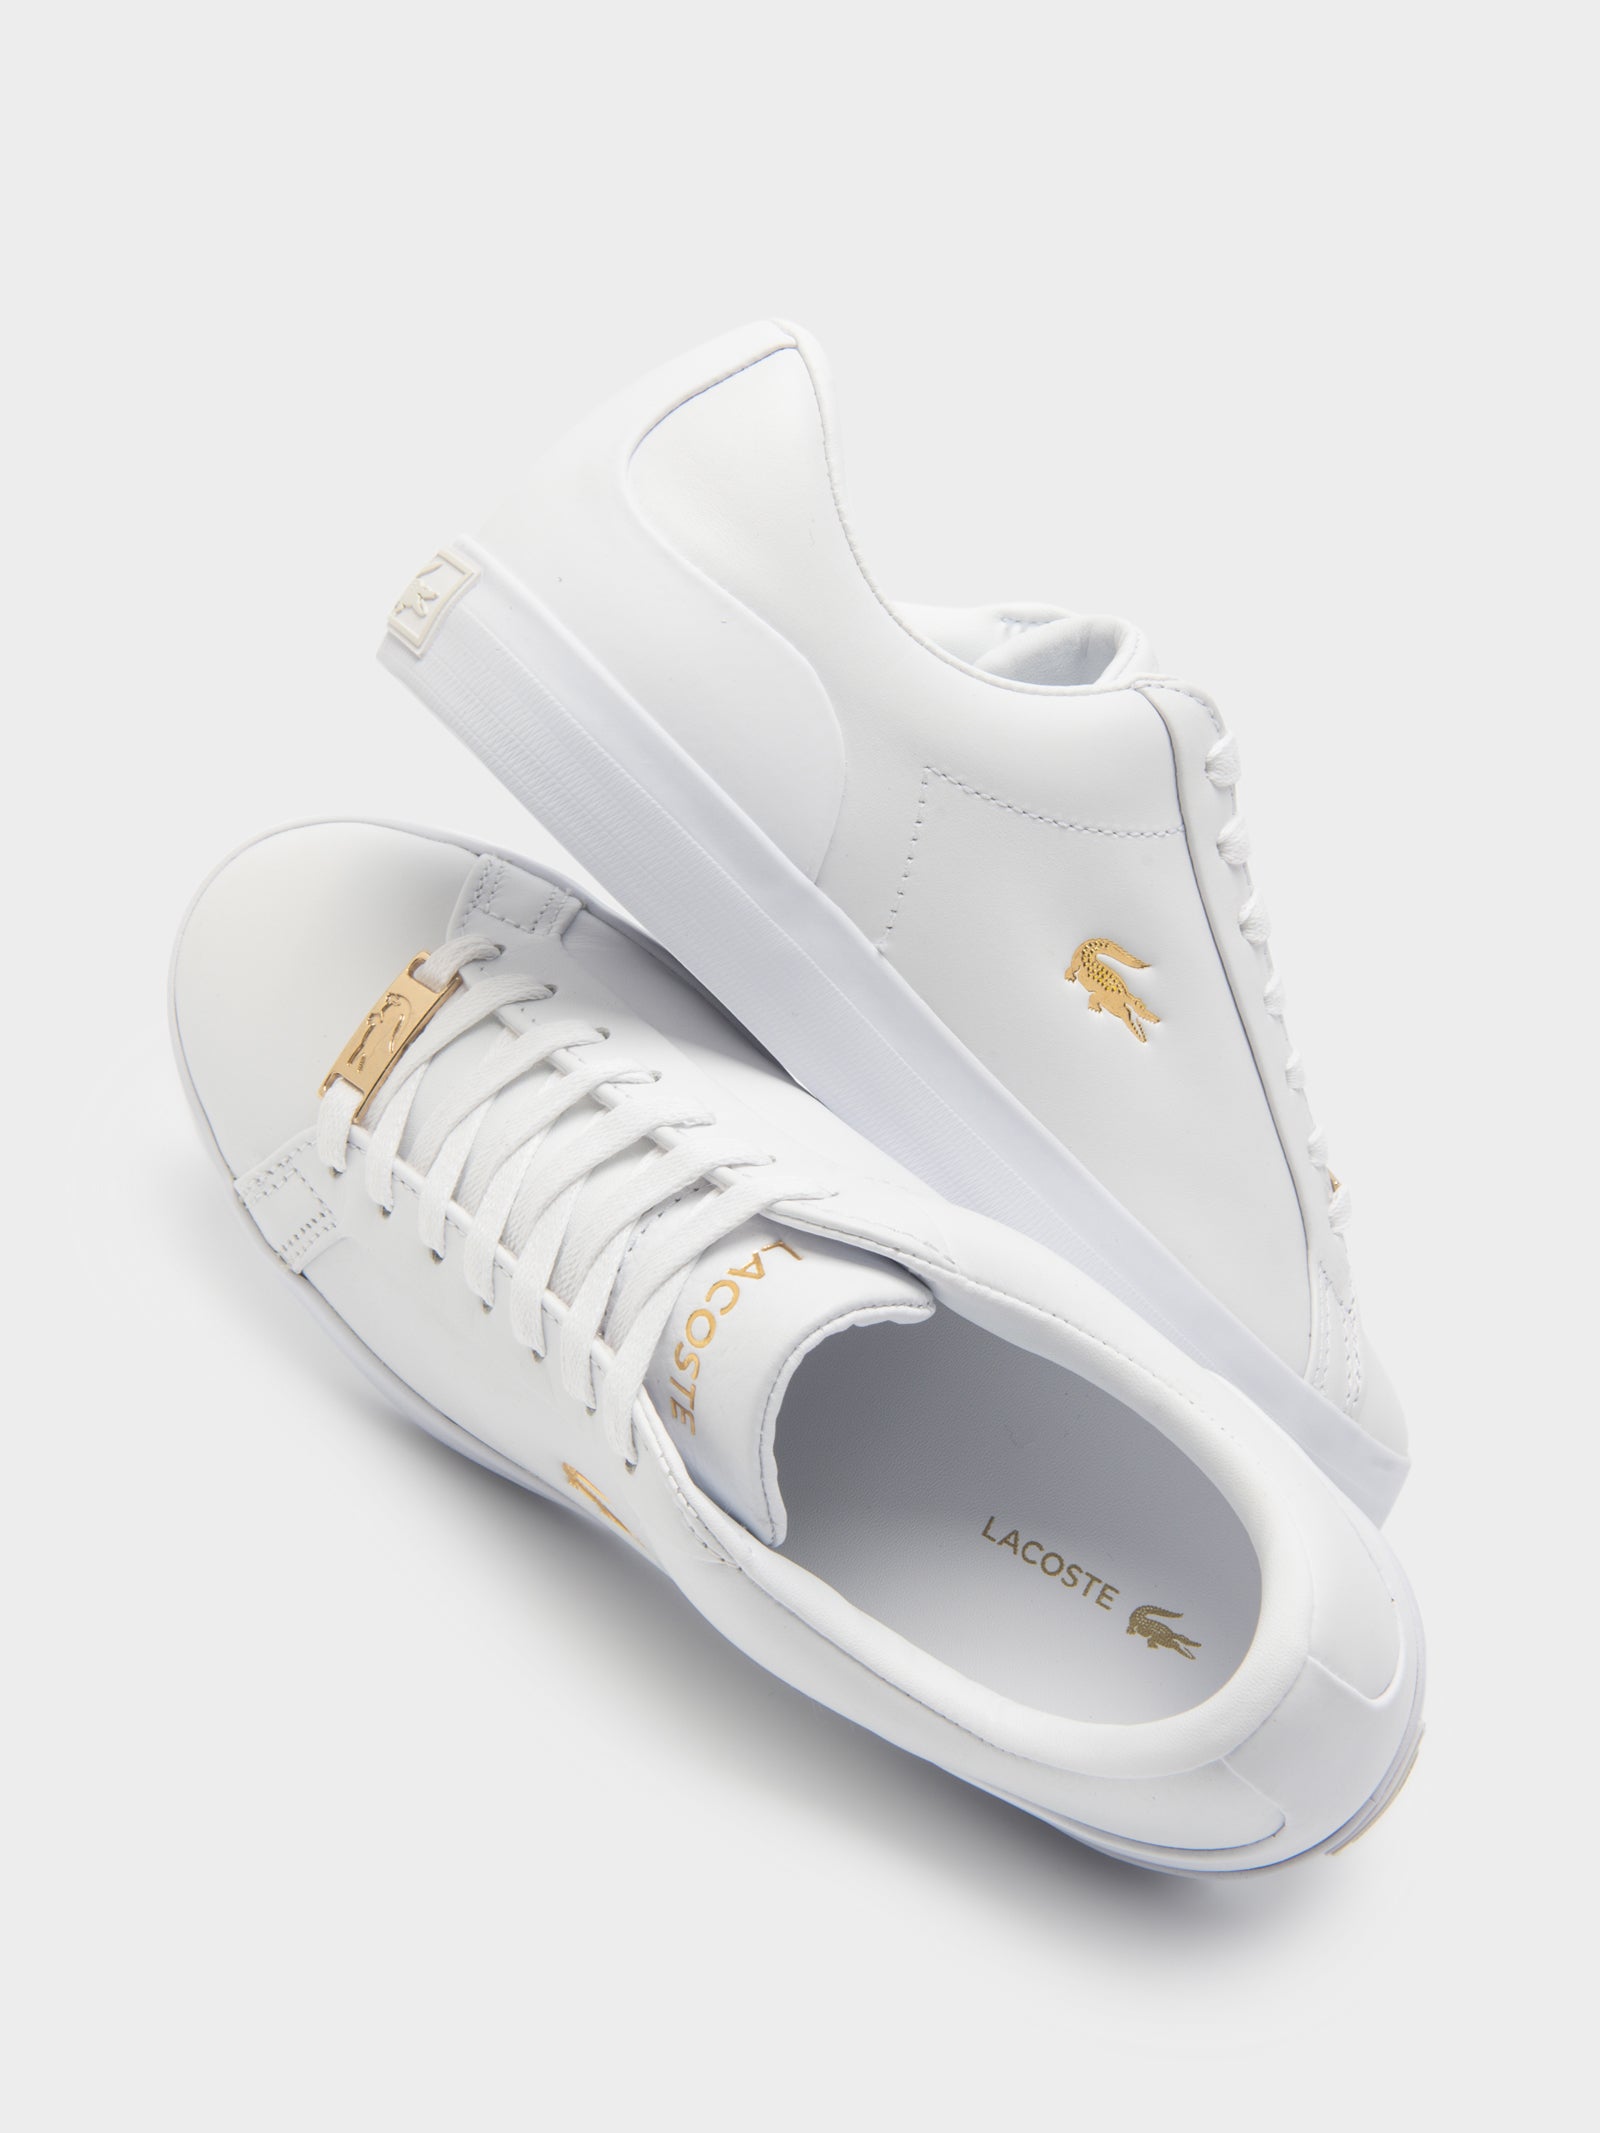 Womens Lerond 0922 1 in White & Gold - Glue Store